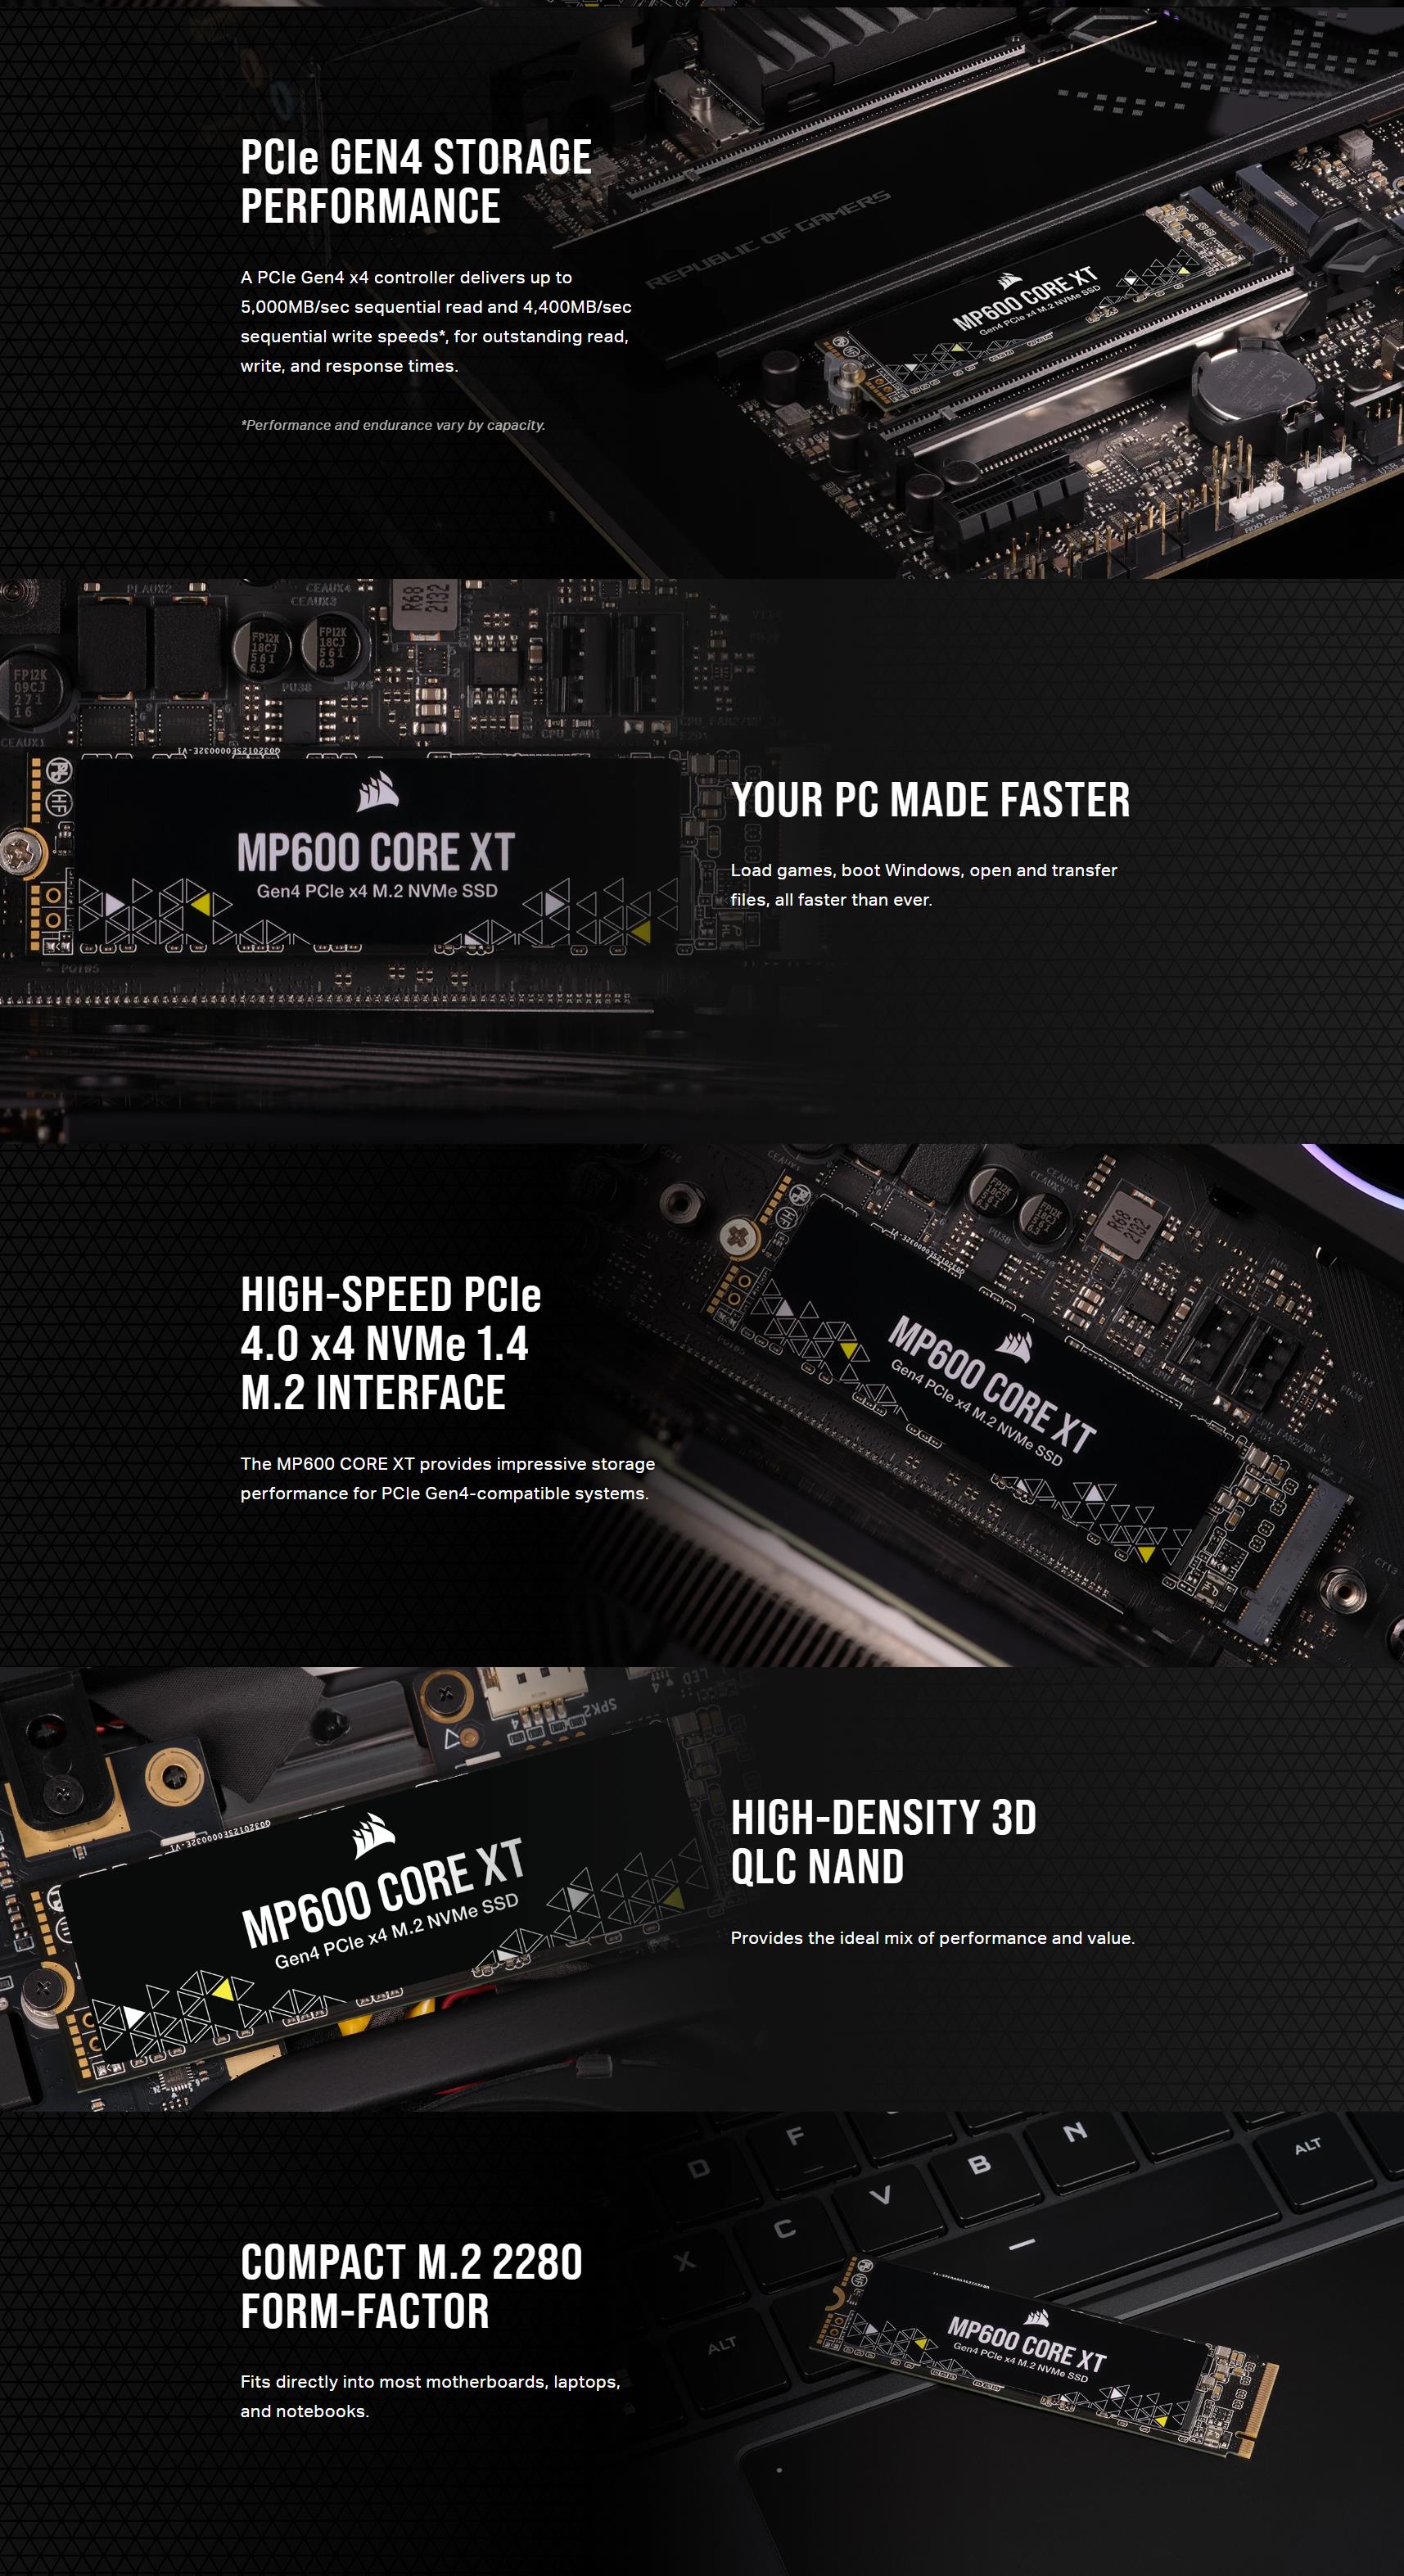 A large marketing image providing additional information about the product Corsair MP600 CORE XT PCIe Gen4 NVMe M.2 SSD - 2TB - Additional alt info not provided